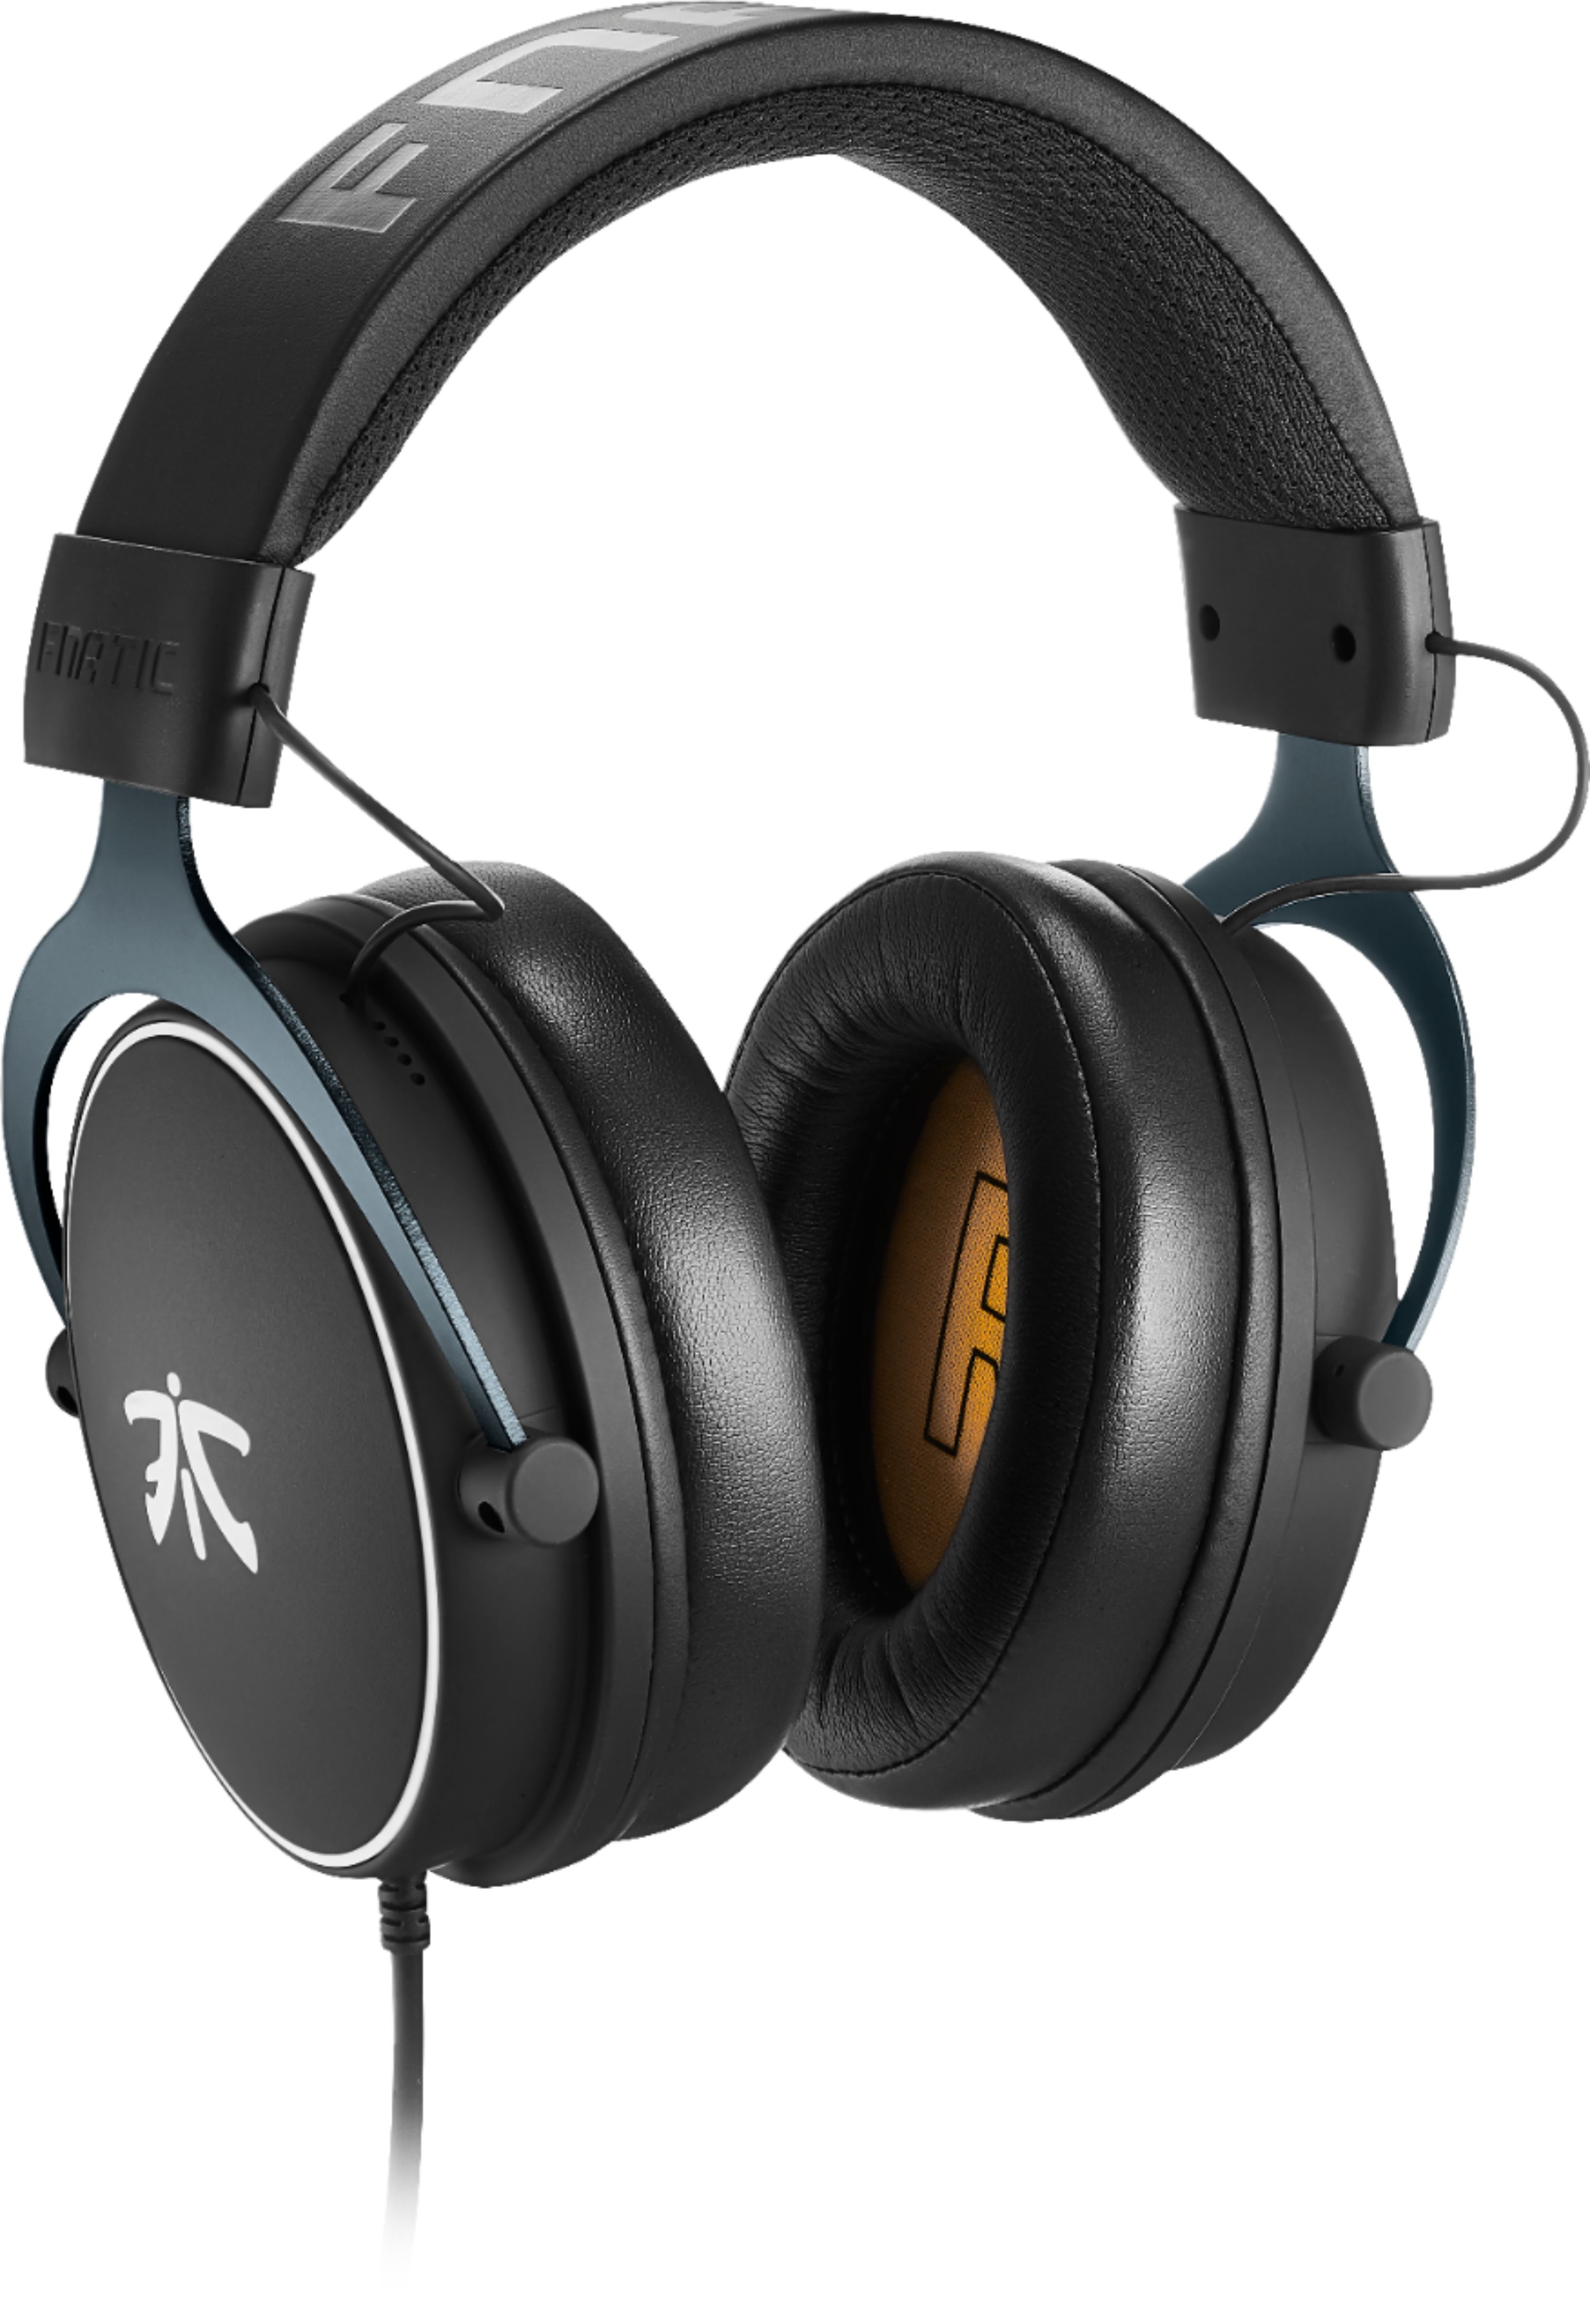 Fnatic REACT Wired Stereo Gaming Headset Black C-HS0003 - Best Buy